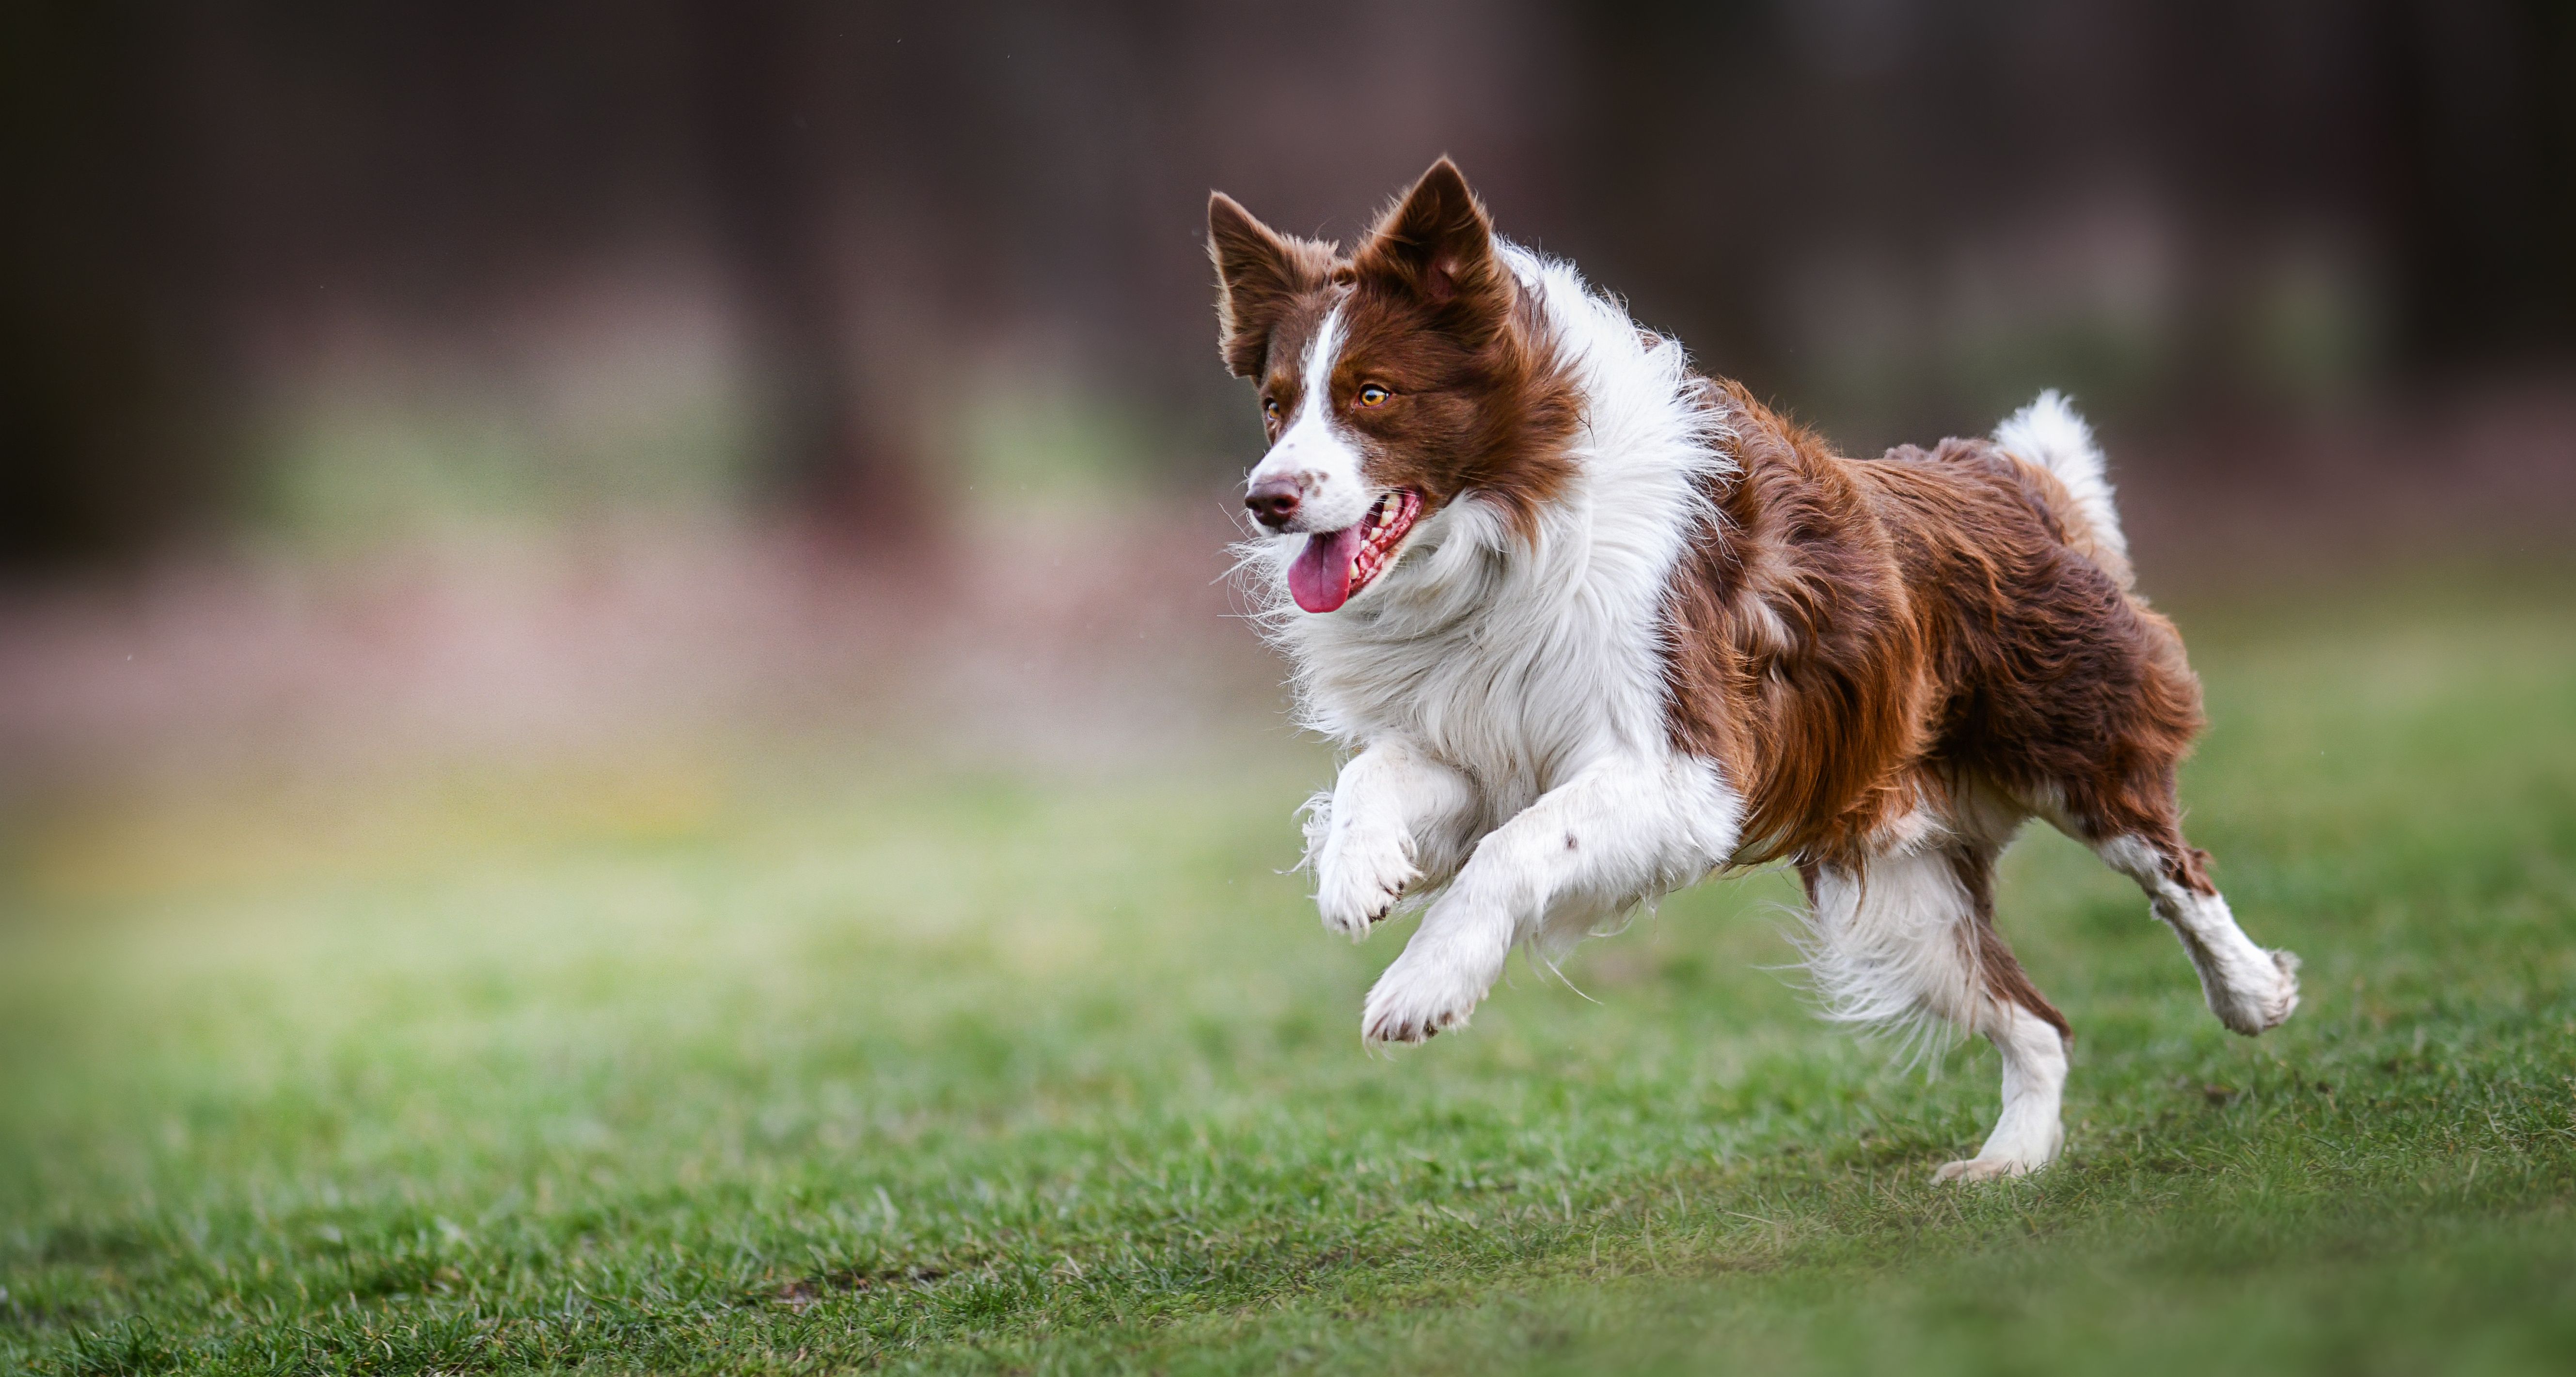 New supplement addresses health issues associated with dog obesity